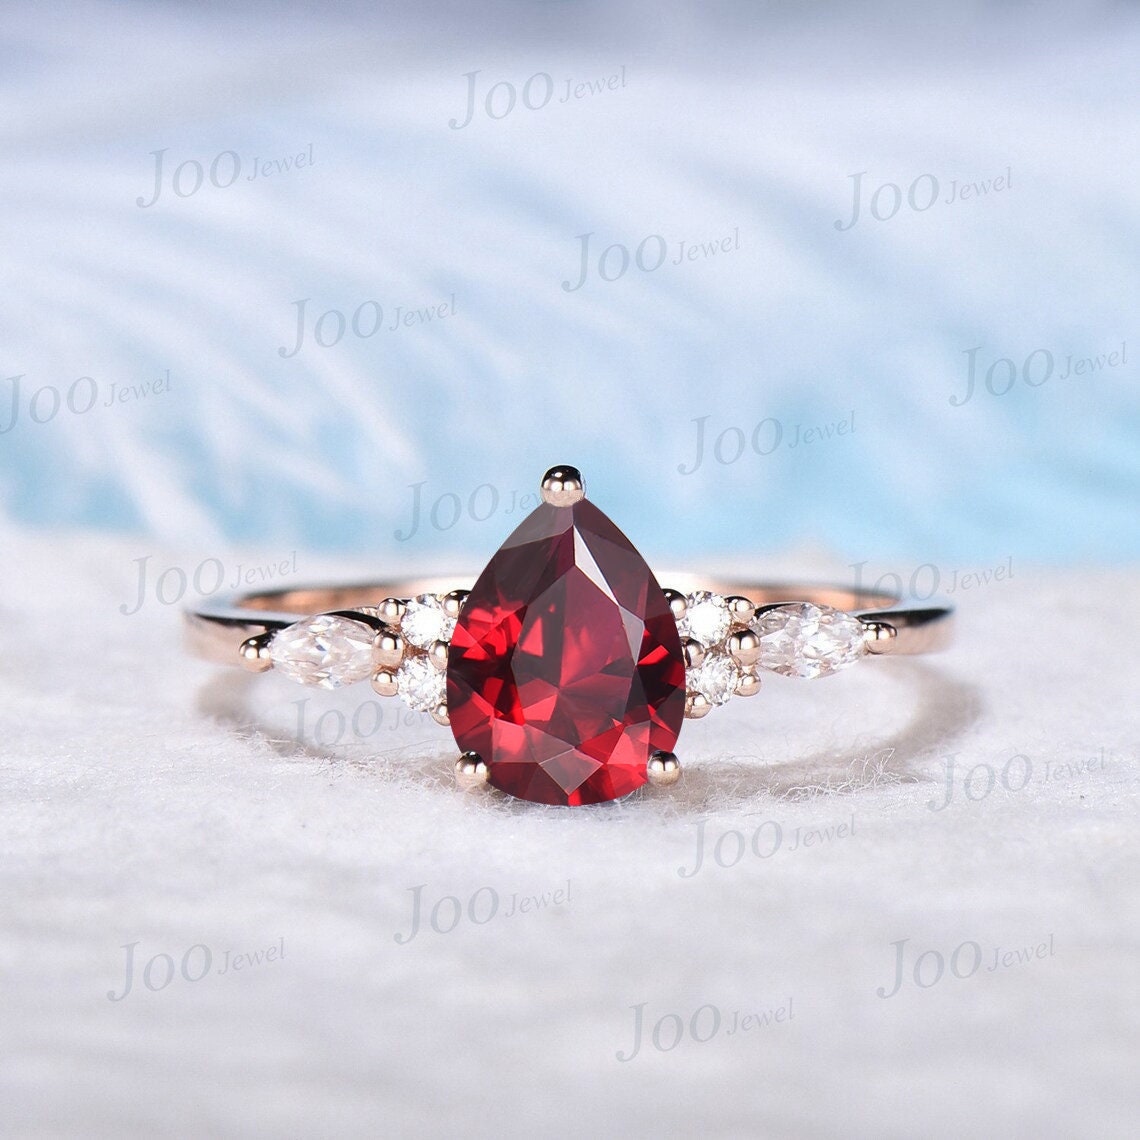 Vintage Pear Shaped Ruby Engagement Ring Sterling Silver 1.25ct Ruby Bridal Wedding ring Anniversary Gift For Her July Birthstone Jewelry